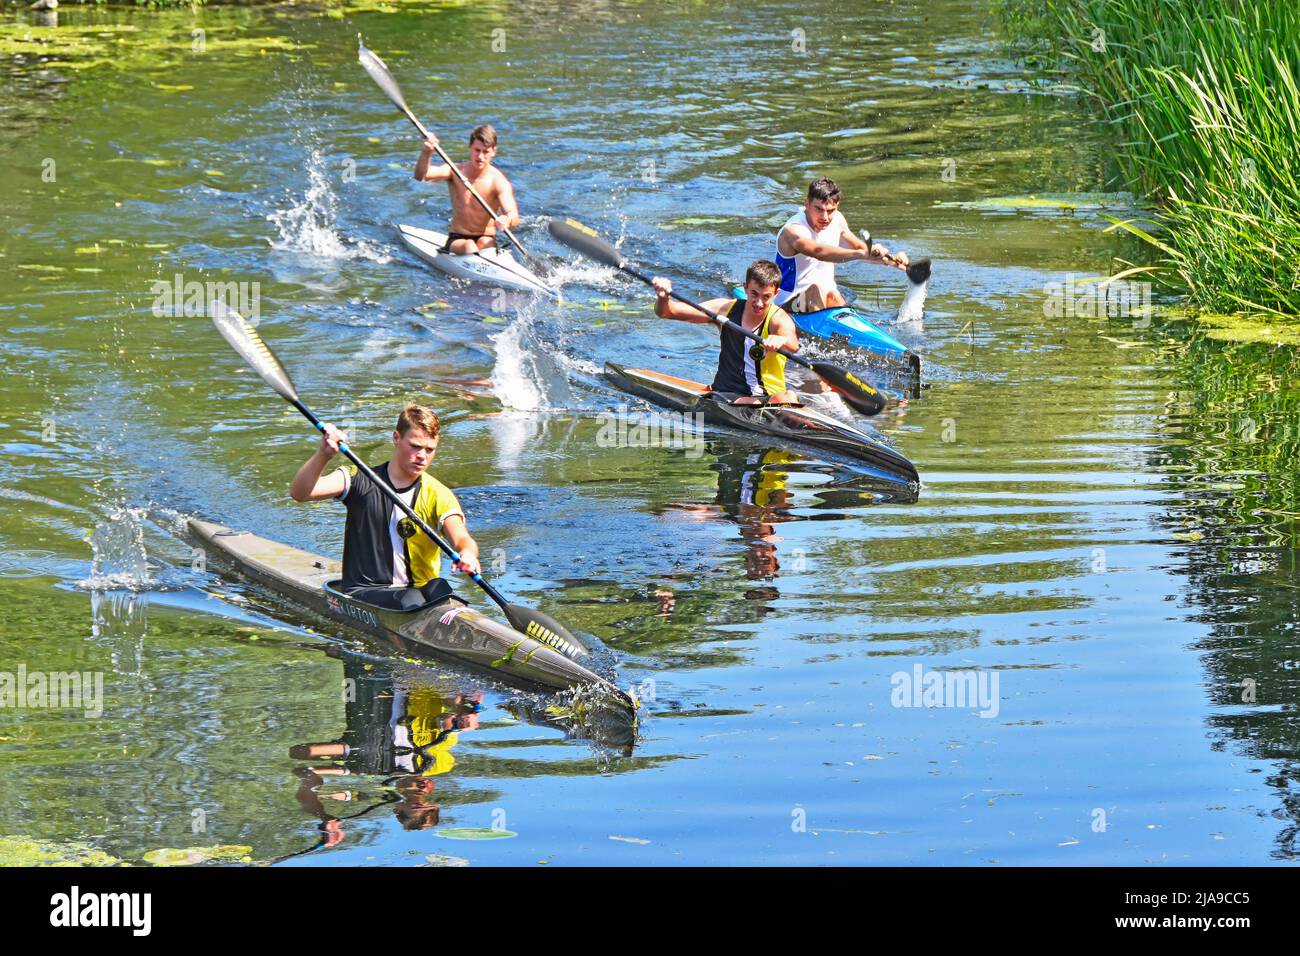 Summer view looking down from above on a group of four enthusiastic young males  paddling kayaks on calm River Chelmar in Chelmsford Essex England UK Stock Photo